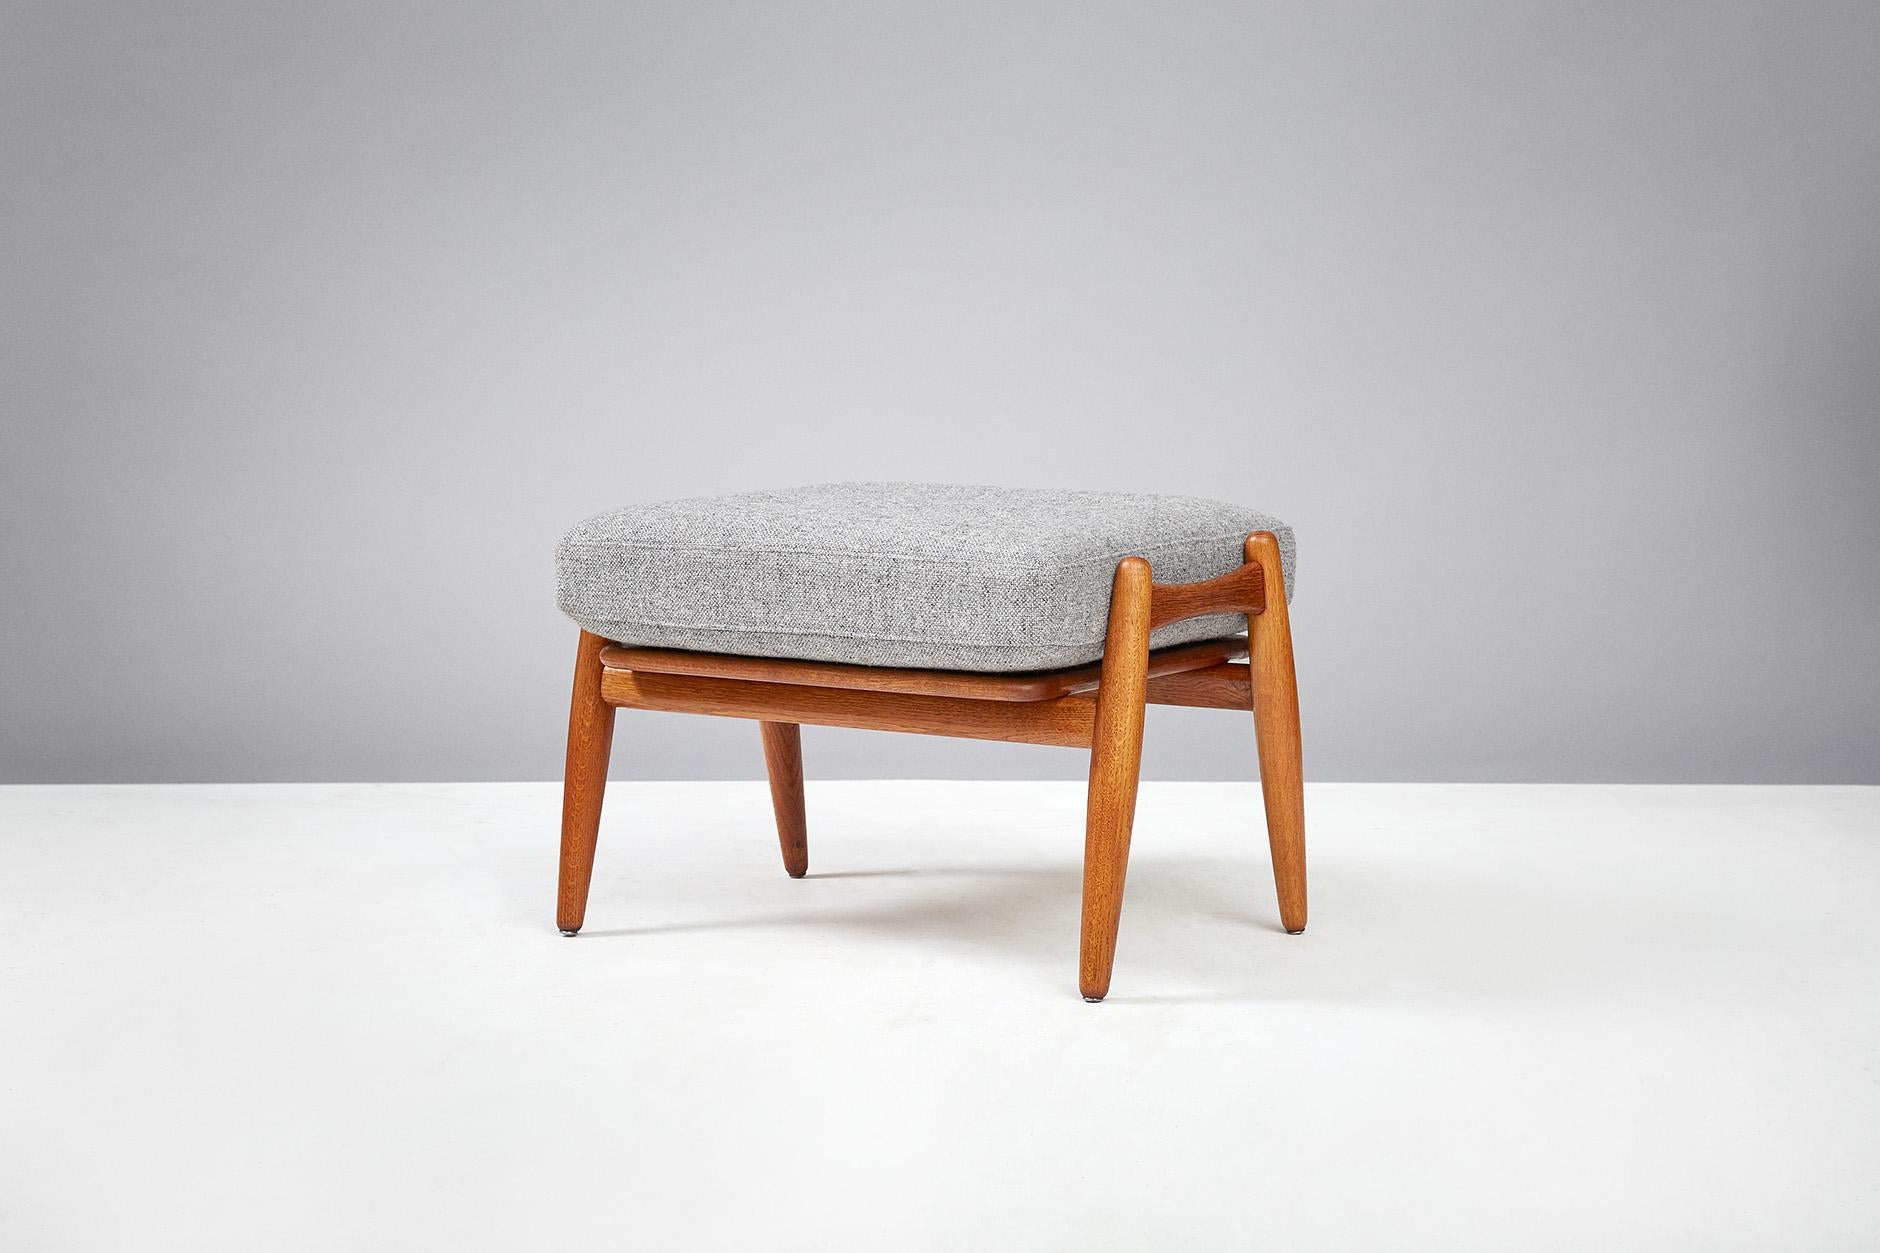 Hans J. Wegner
GE-240 cigar stool, circa 1950s.

Oak ottoman produced by Getama, Denmark to compliment the GE-240 and GE-260 lounge chairs. Original sprung cushion has been recovered in grey Kvadrat wool fabric.